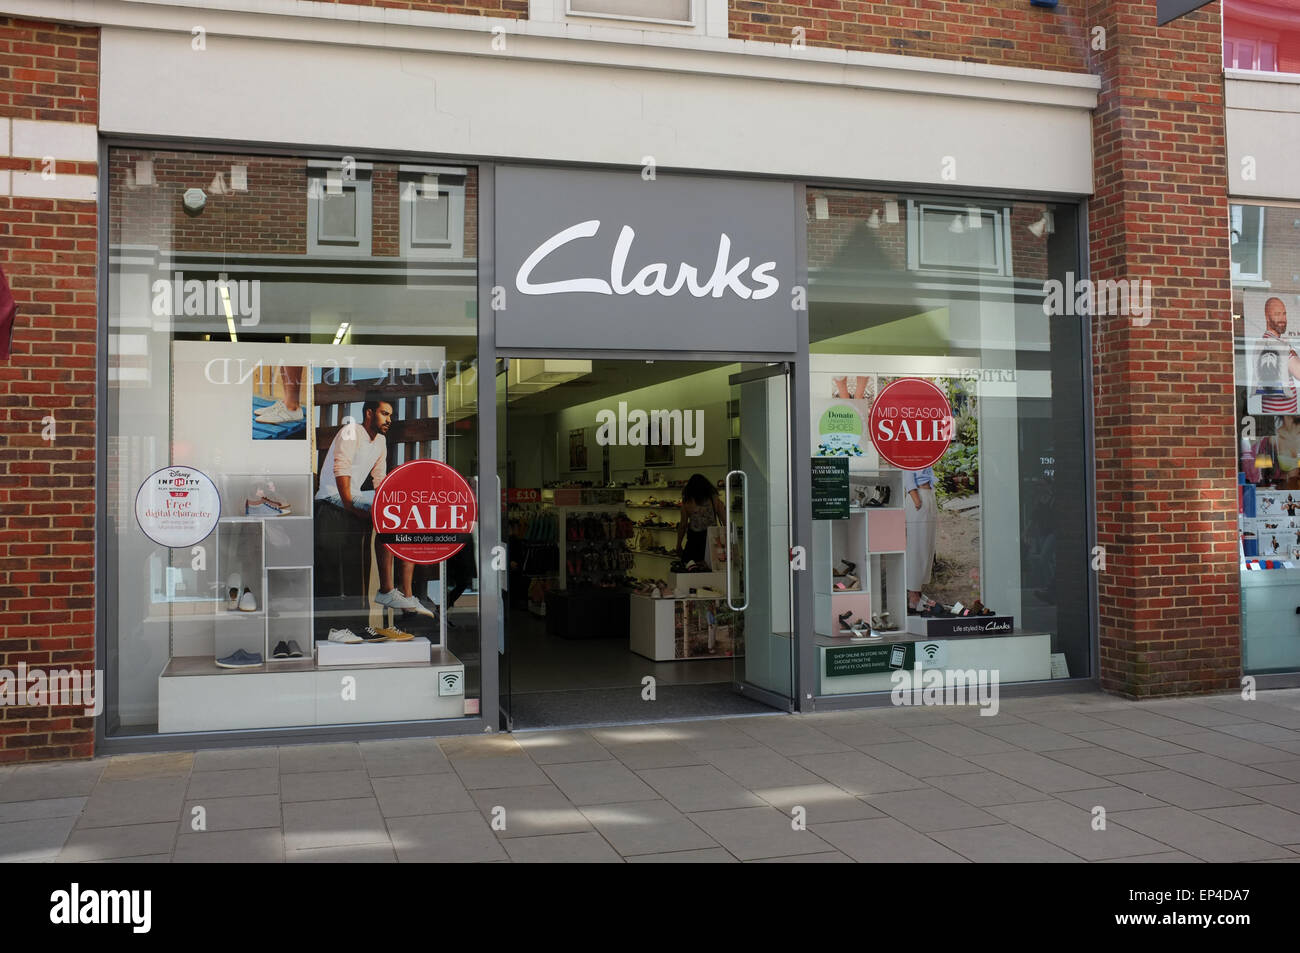 clarks shoes chicago locations